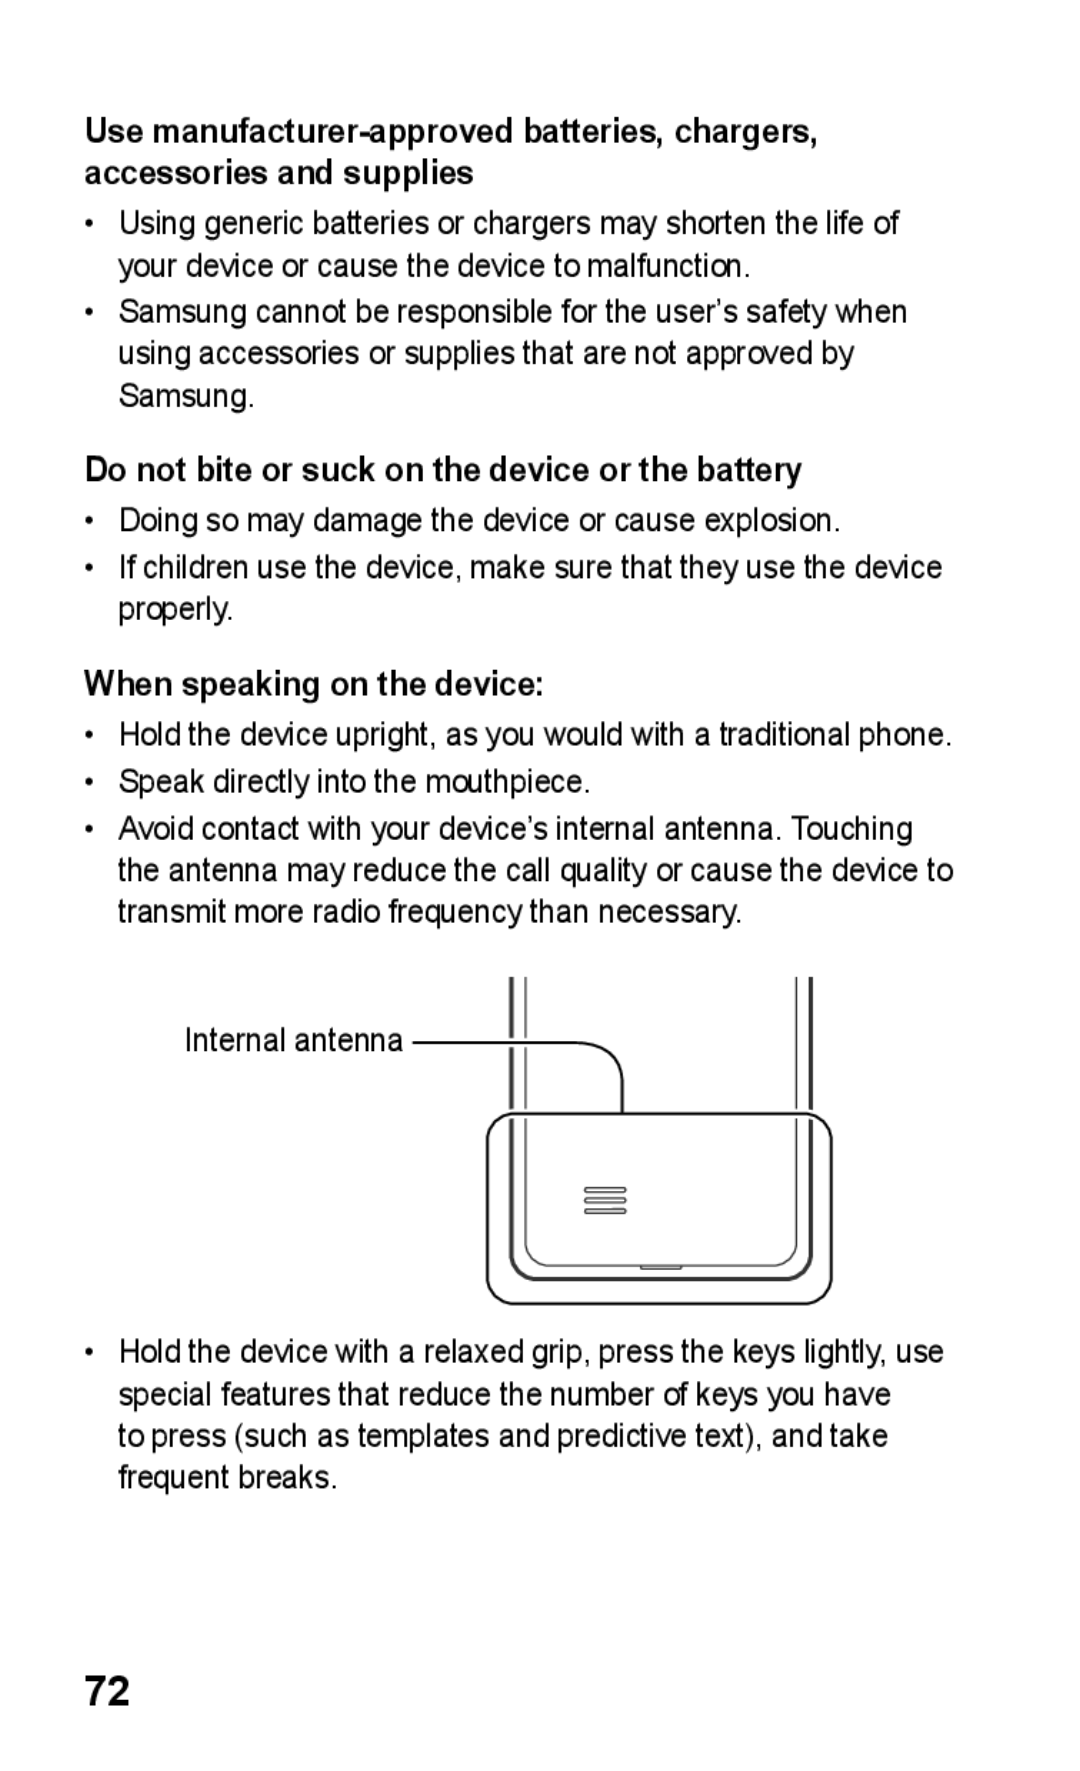 Samsung GT-S5260RWPXEF, GT-S5260RWPDBT manual Do not bite or suck on the device or the battery, When speaking on the device 